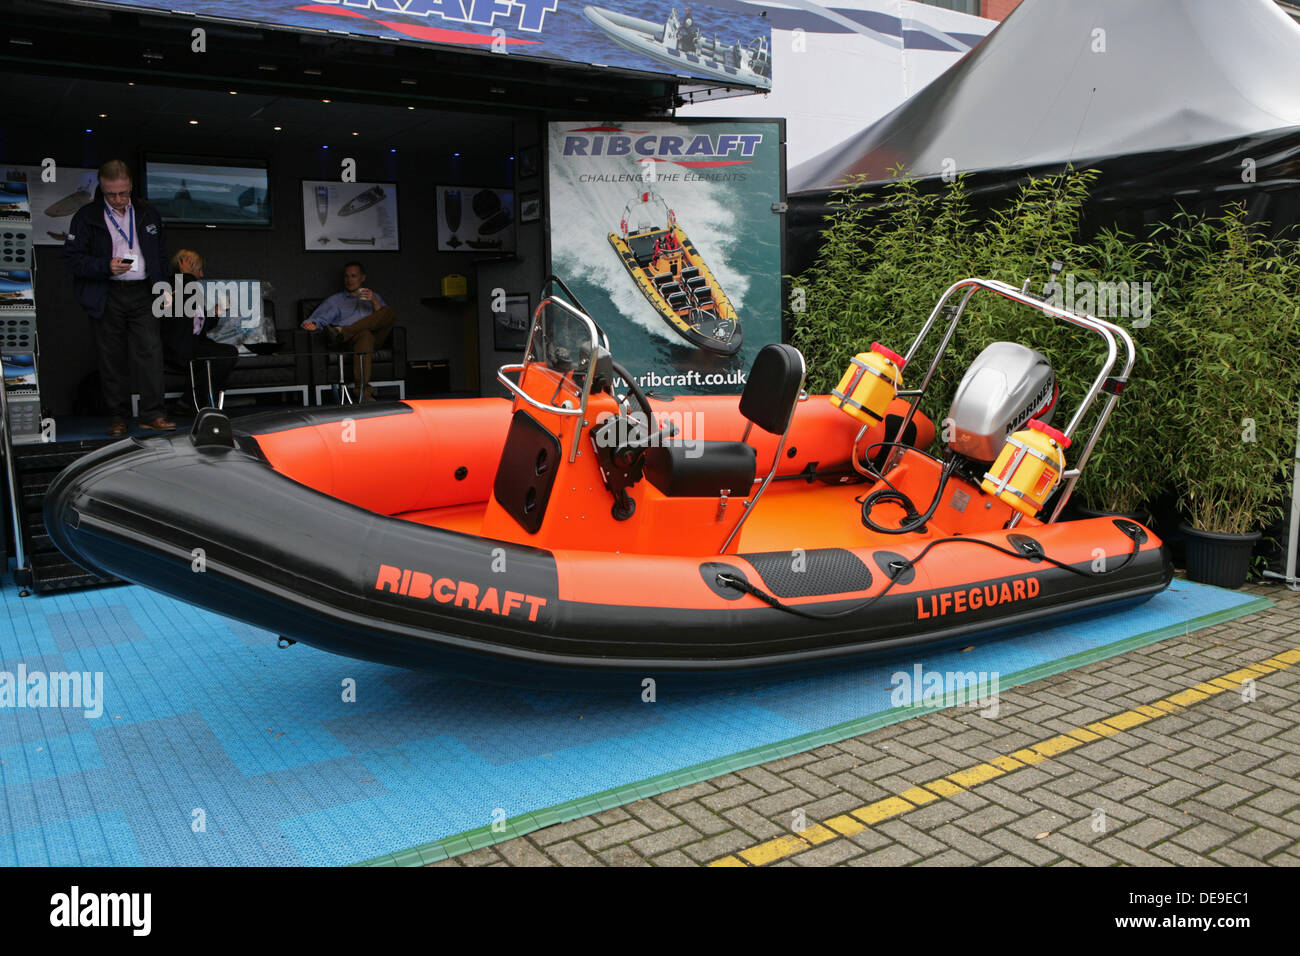 Southampton,UK,13th September 2013,A Ribcraft at the PSP Southampton boat show©Keith Larby/Alamy Live News Stock Photo